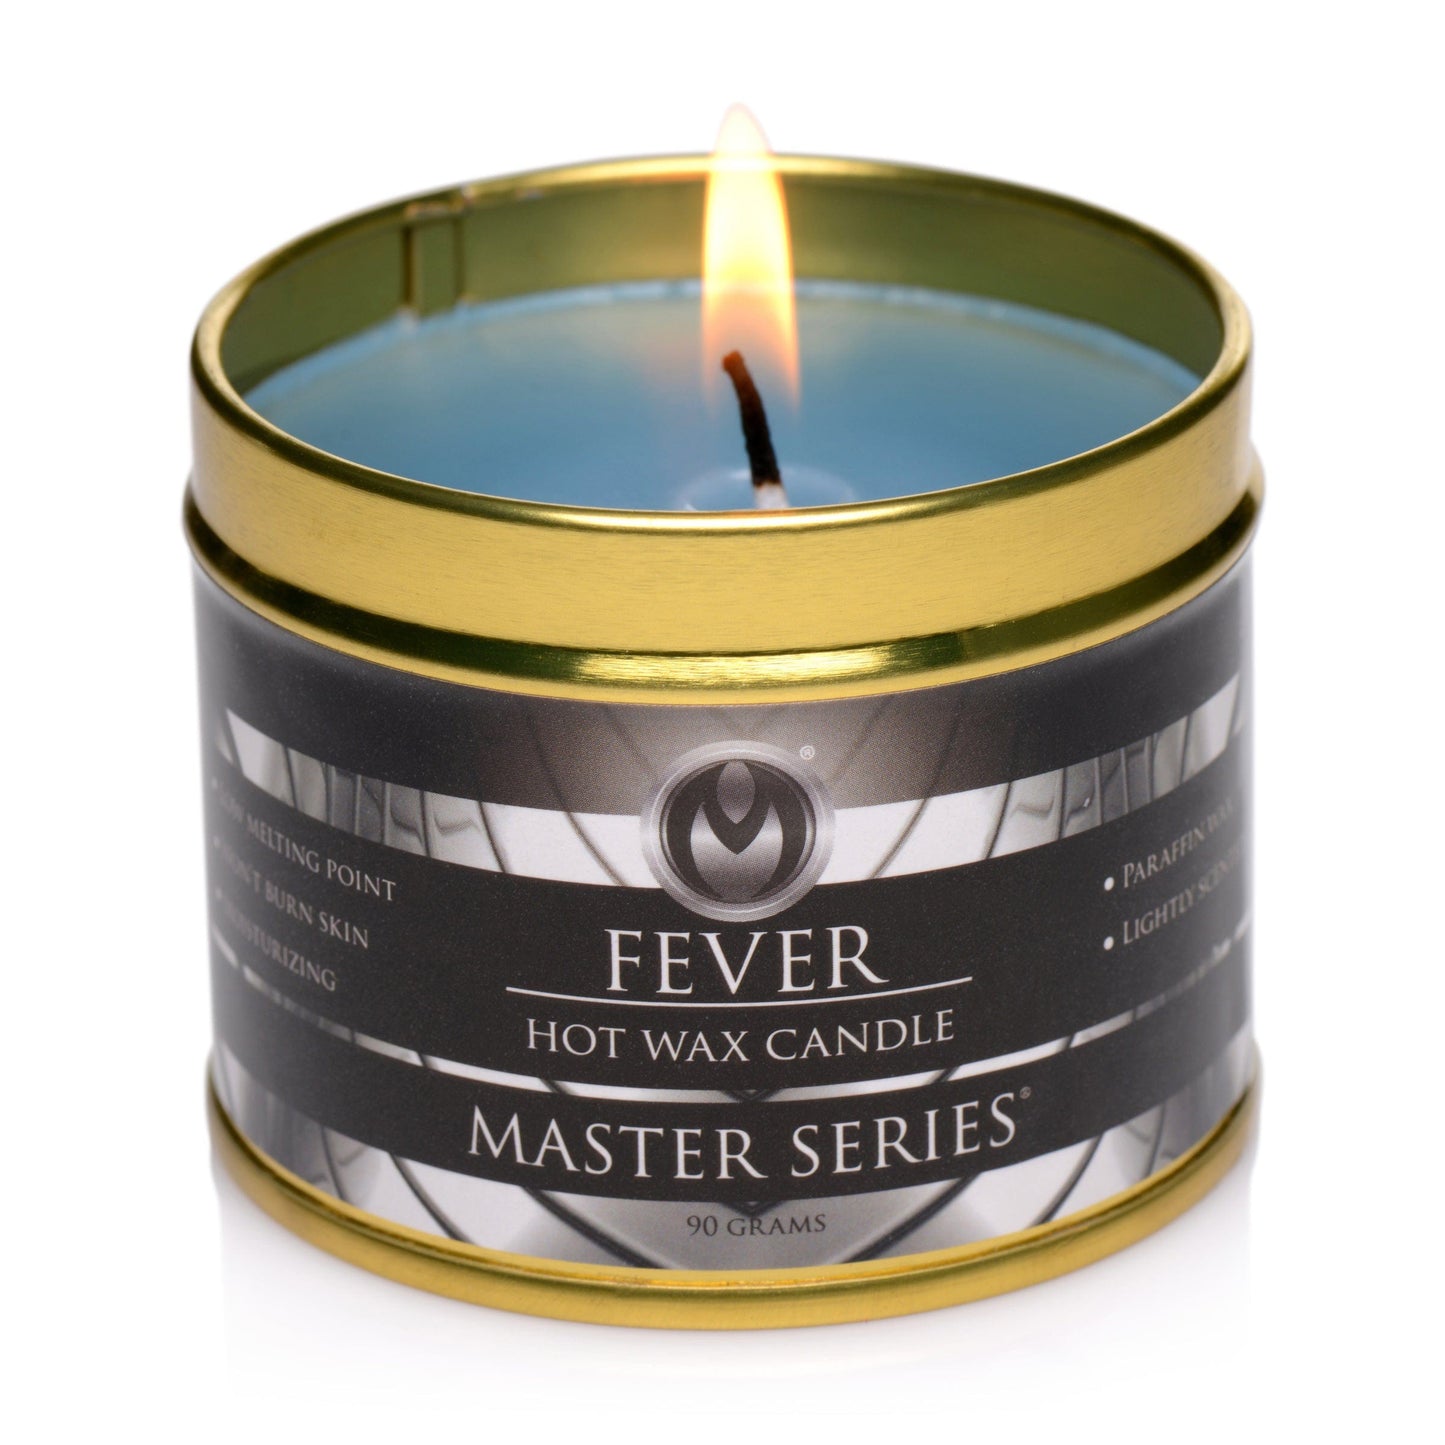 Master Series Dripping Candle Fever Hot Wax Candle - Blue at the Haus of Shag